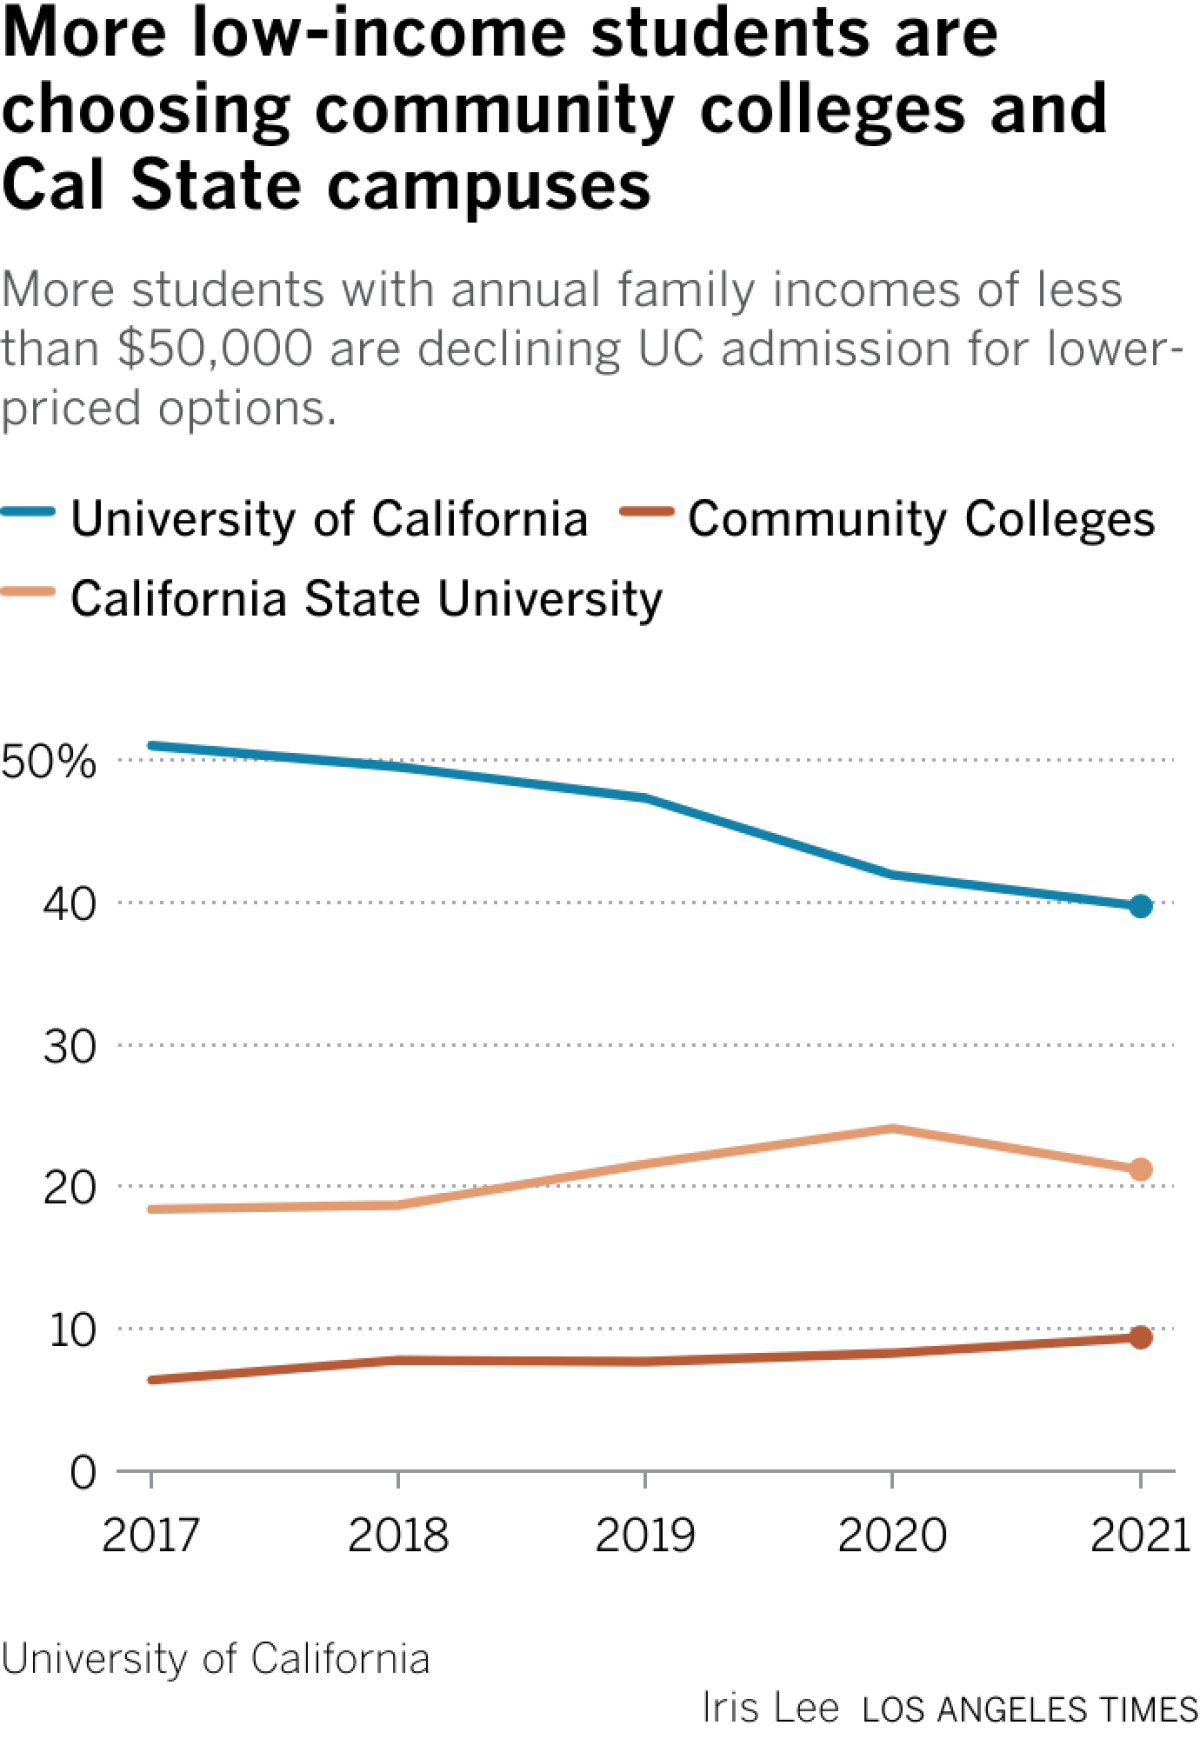 More students with annual family incomes of less than $50,000 are declining UC admission for lower-priced options.